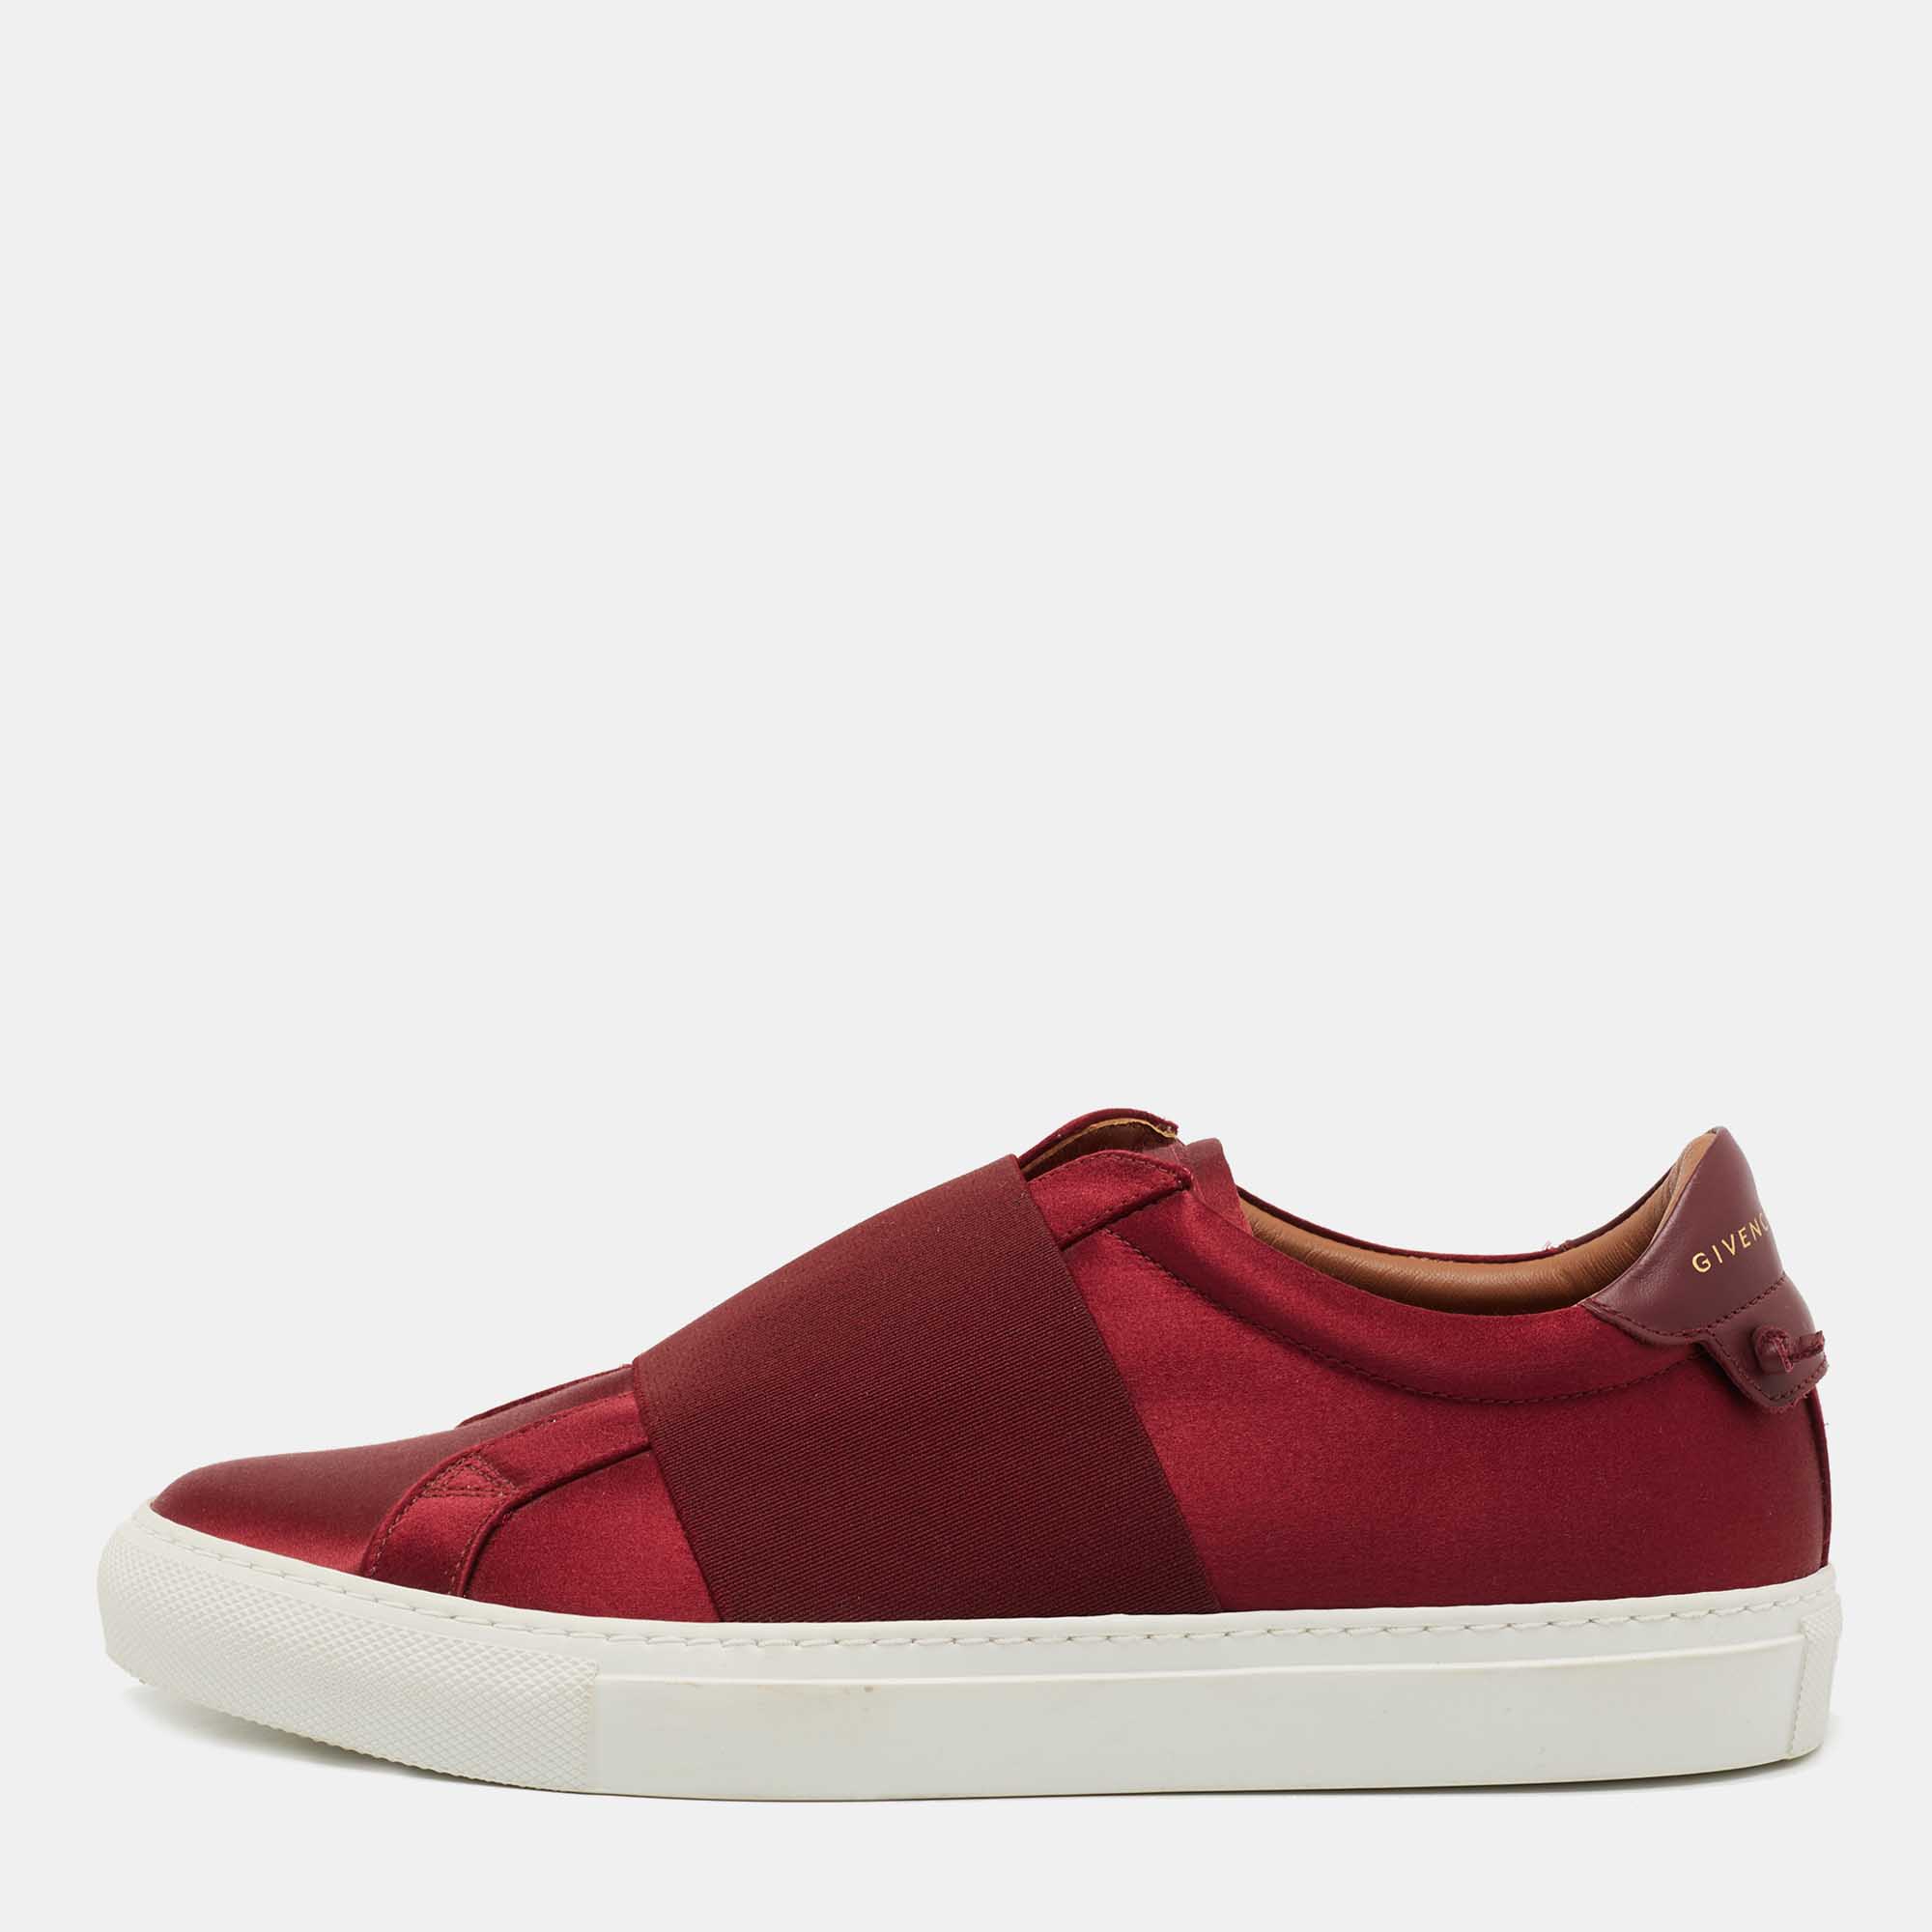 Pre-owned Givenchy Burgundy Satin And Elastic Band Slip On Sneakers Size 40